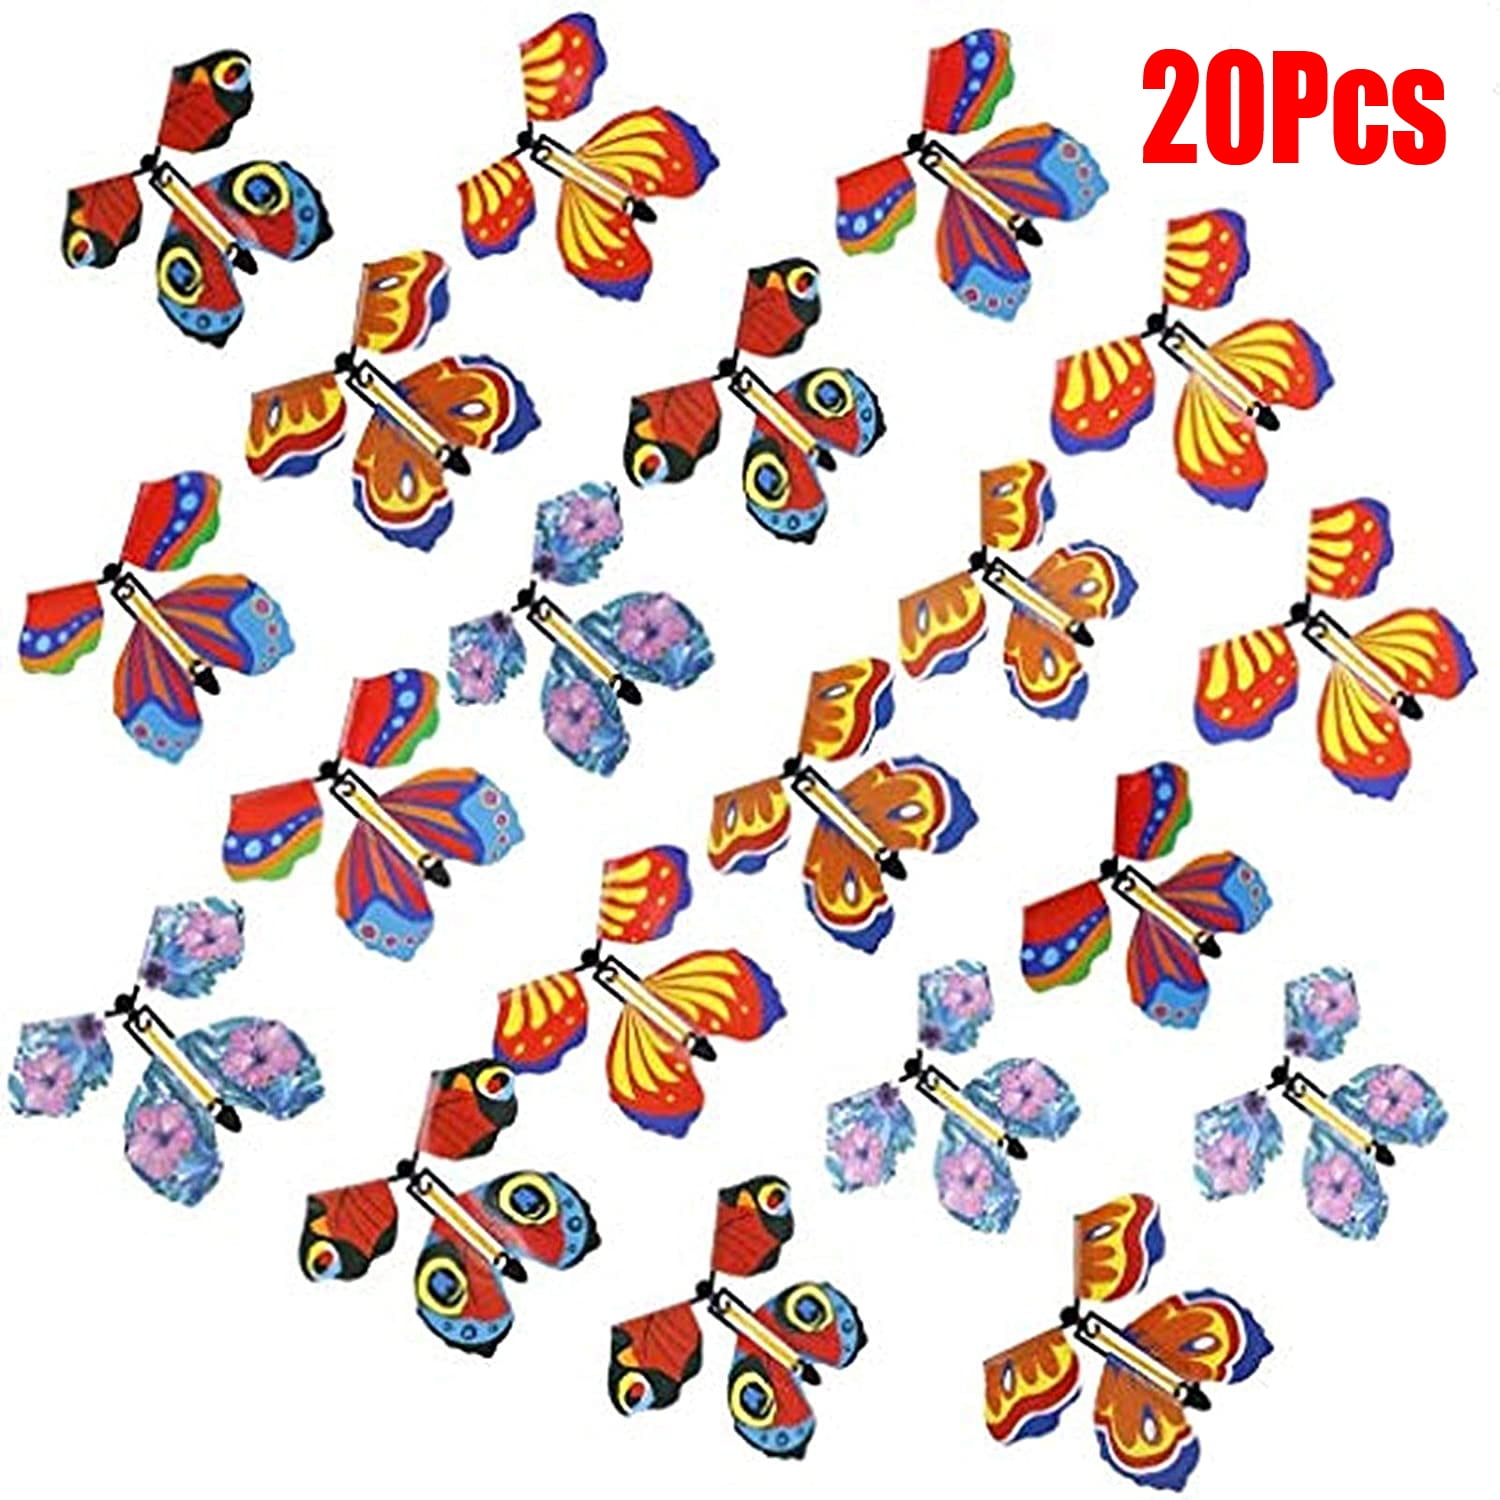  LEAMEERY 5 PCS Magic Wind Up Flying Butterfly Surprise Box,  Explosion Box in The Book Rubber Band Powered Magic Fairy Flying Toy, for  Mom, Birthday Greeting Card Surprise Gift : Toys